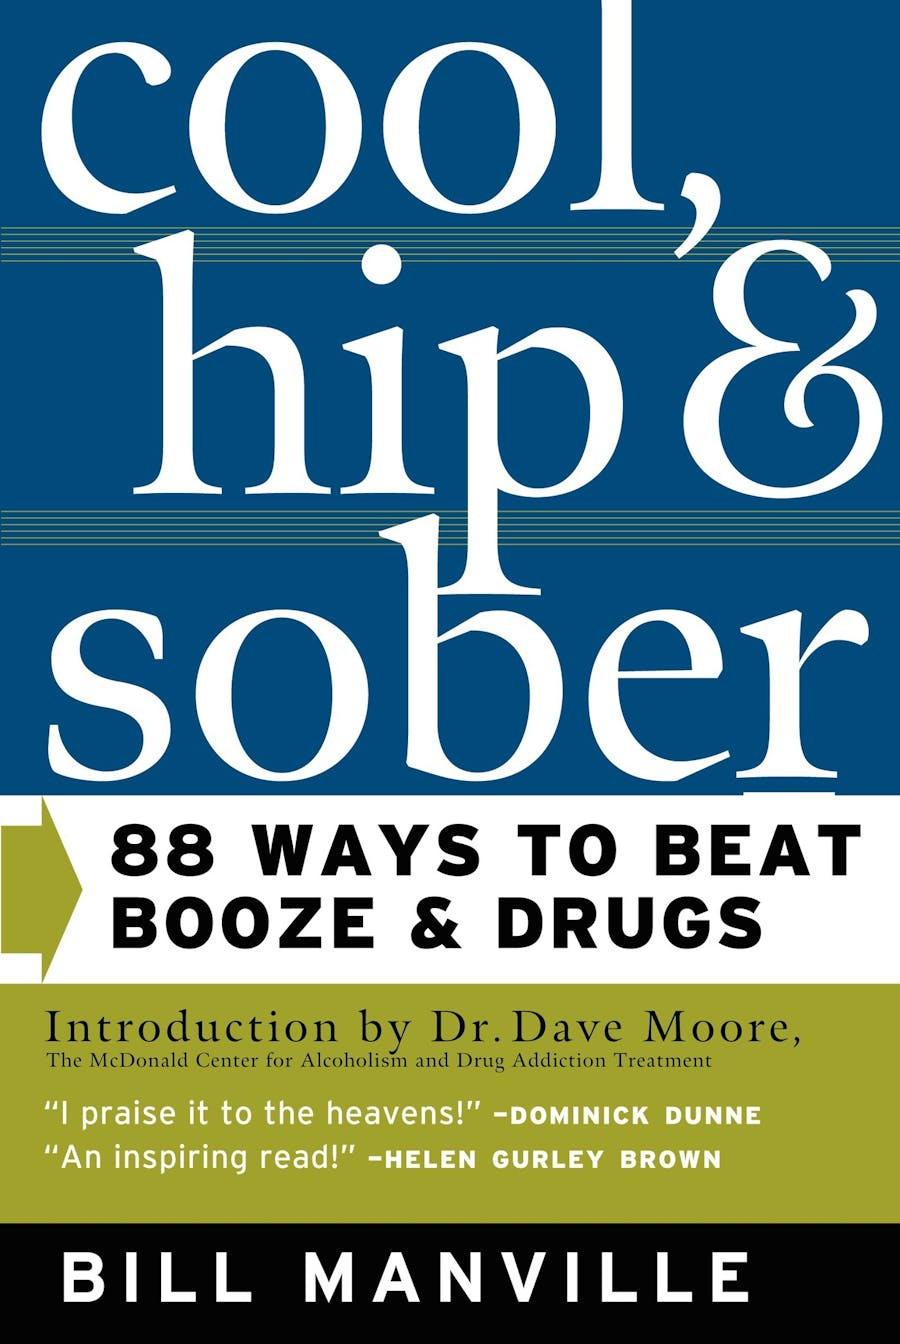 Cool, Hip & Sober by Bill Manville